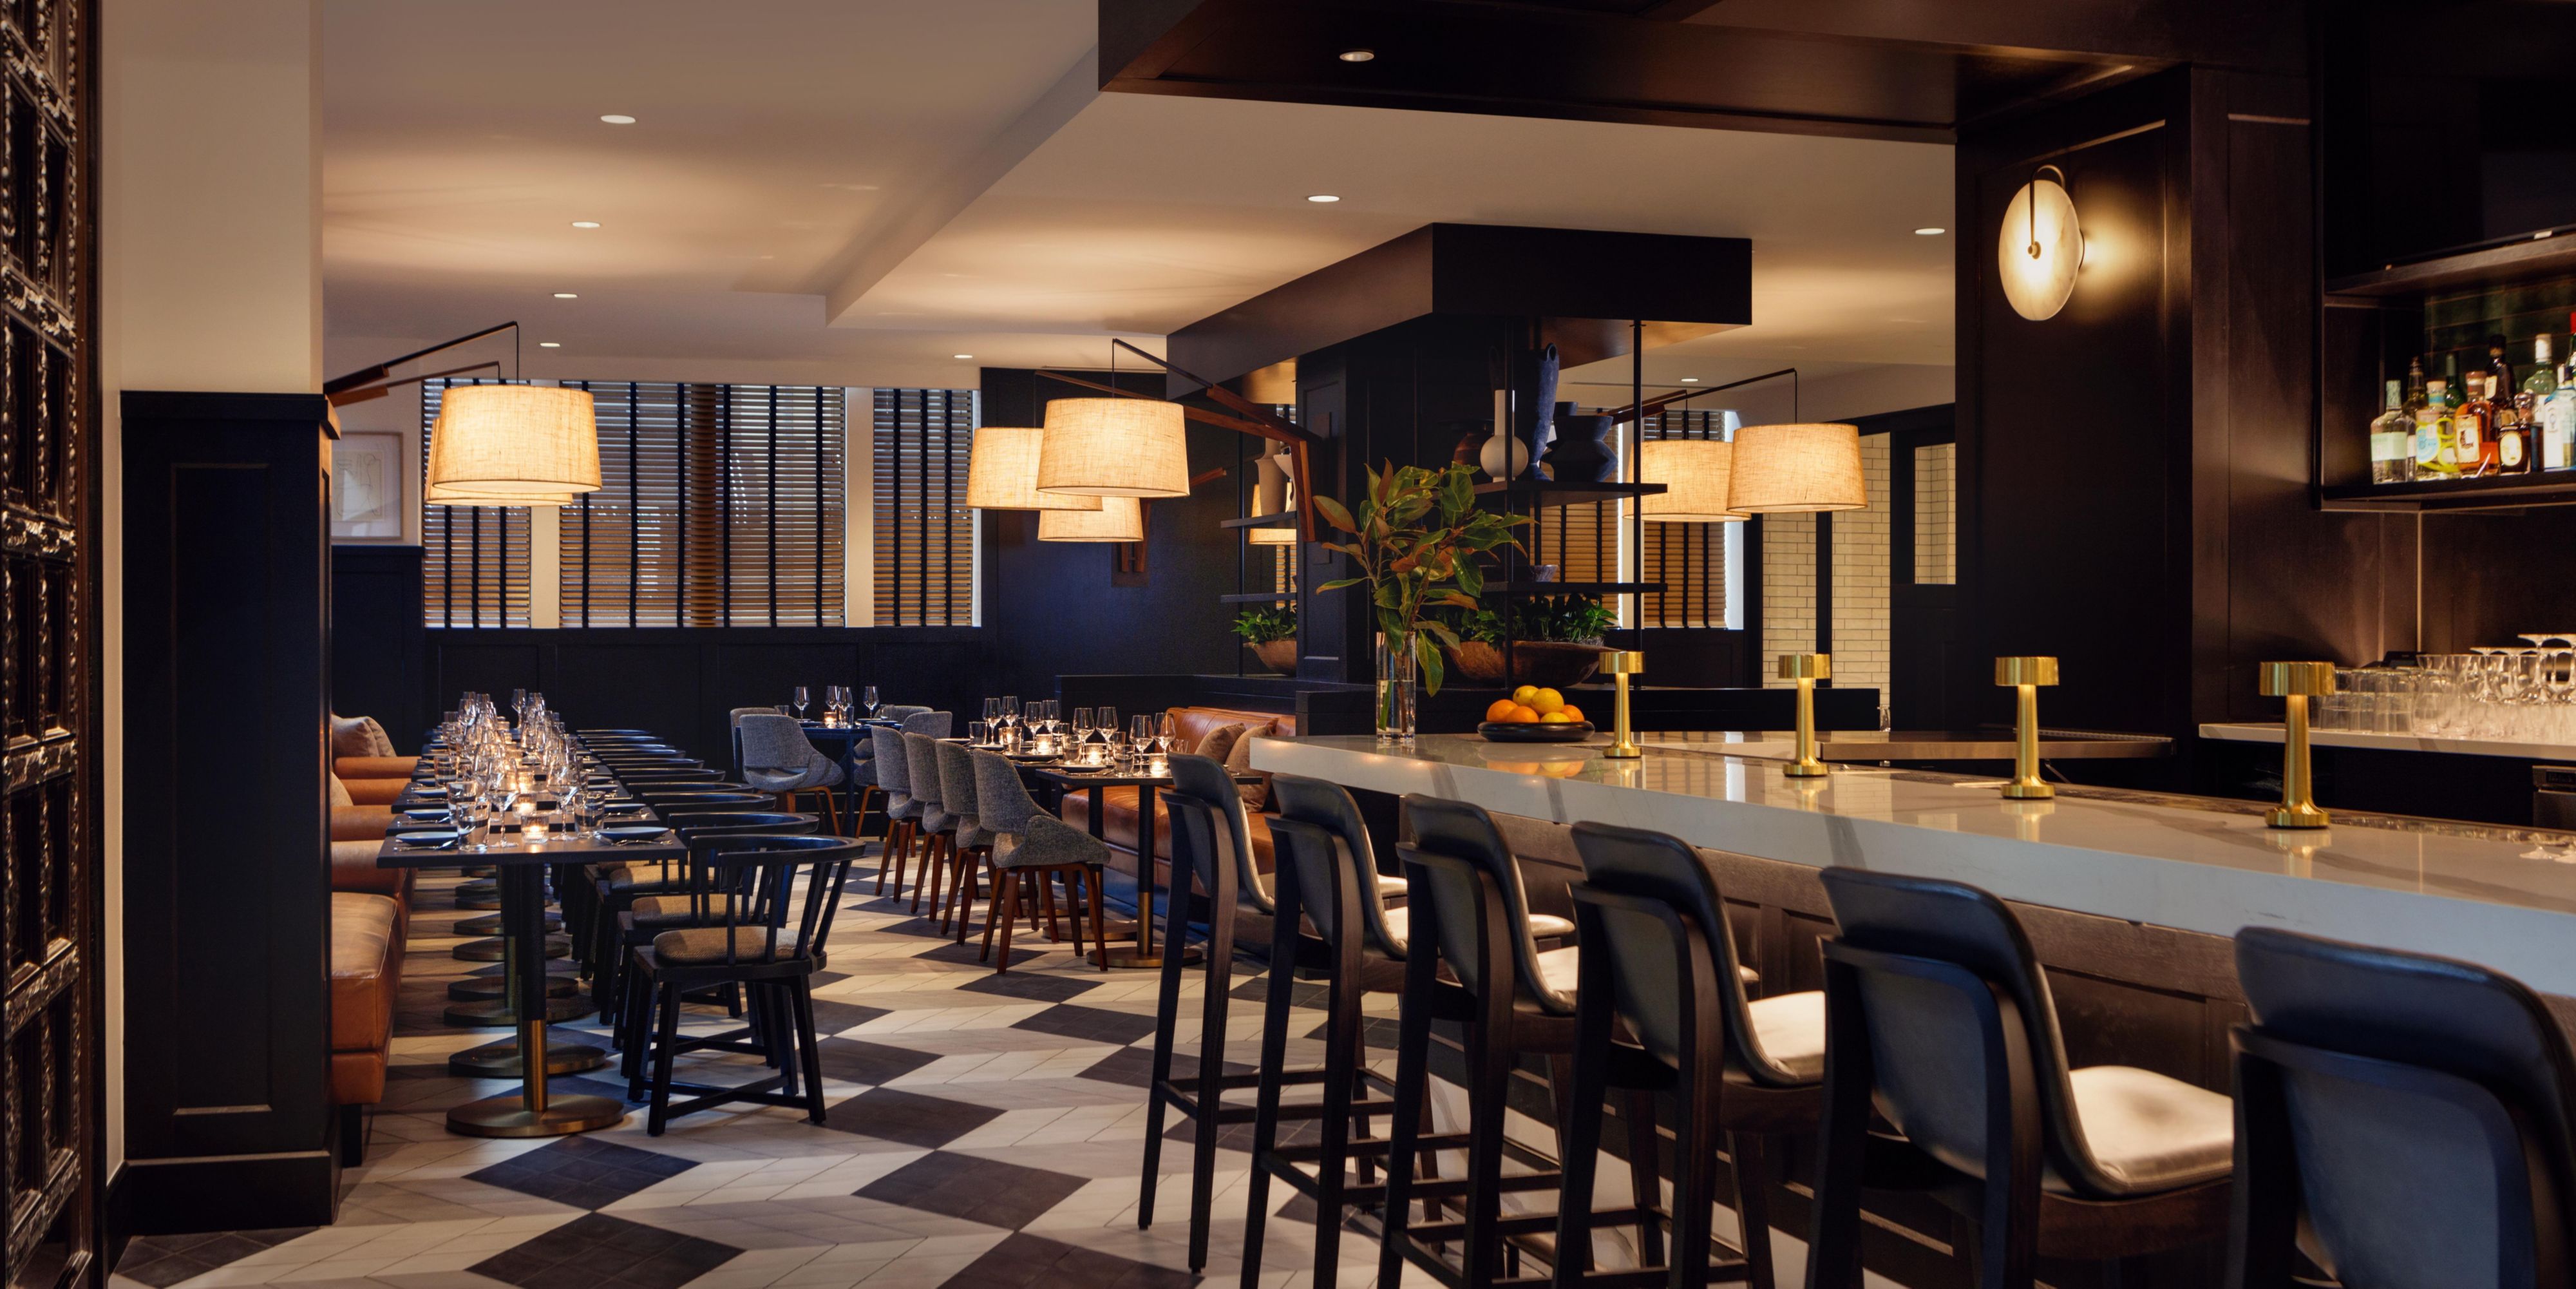 Classic Italian fare comes alive at Il
Modo—Italian for “The Way”—our bustling
ground-floor restaurant. The kitchen’s modern sensibility lends a vibrant edge to family night out and high-powered client dinners alike.